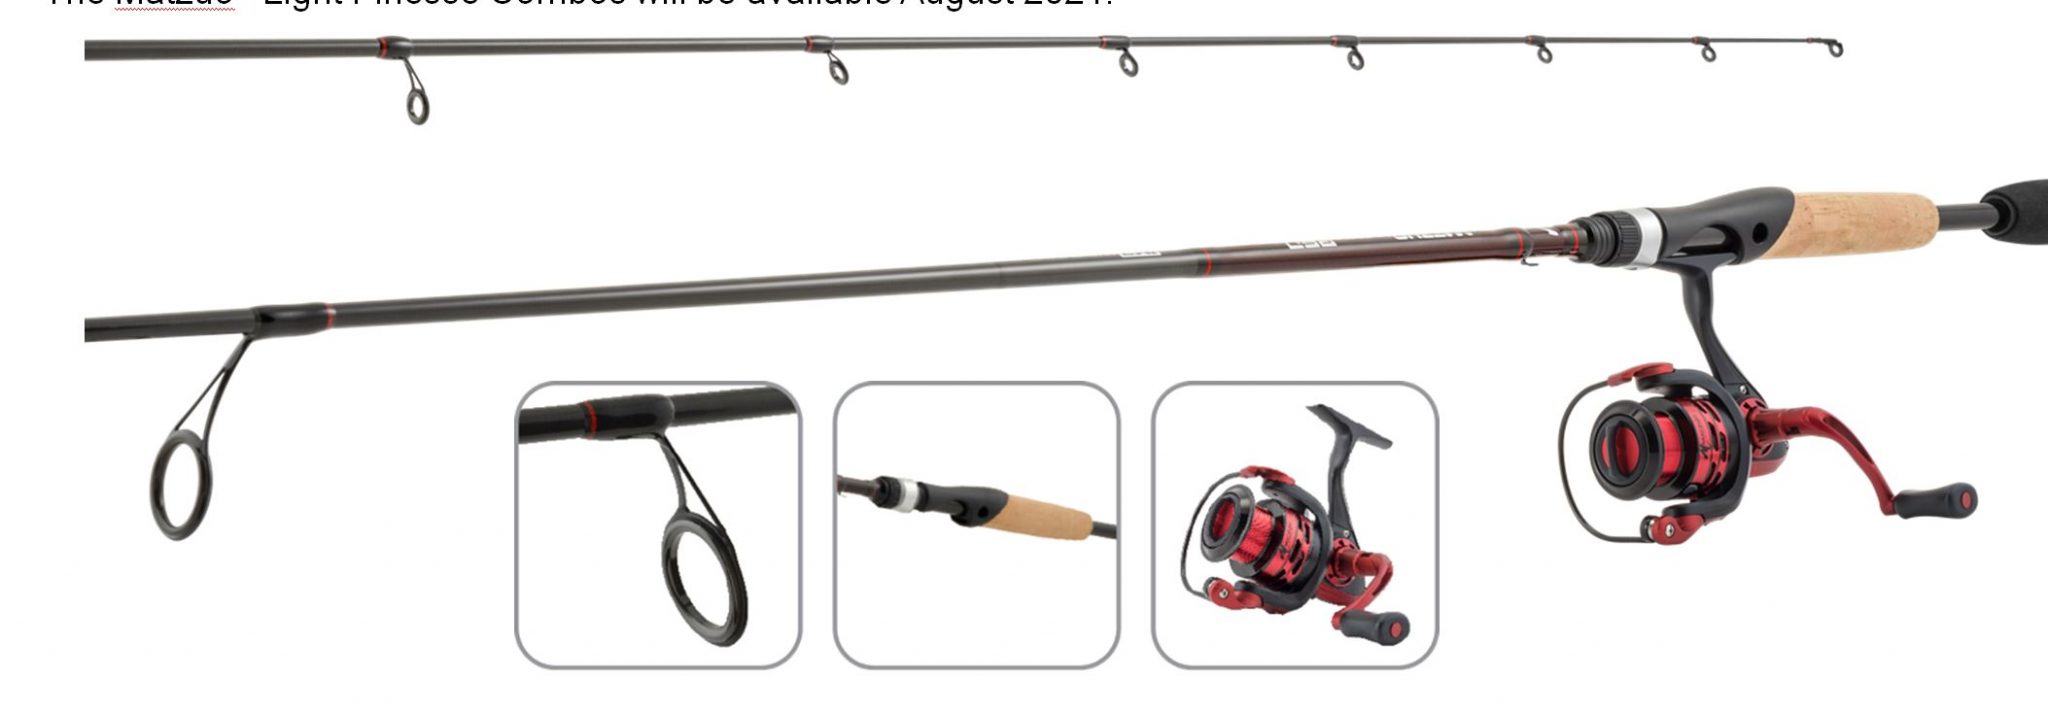 Matzuo America Launches New Products  The Ultimate Bass Fishing Resource  Guide® LLC